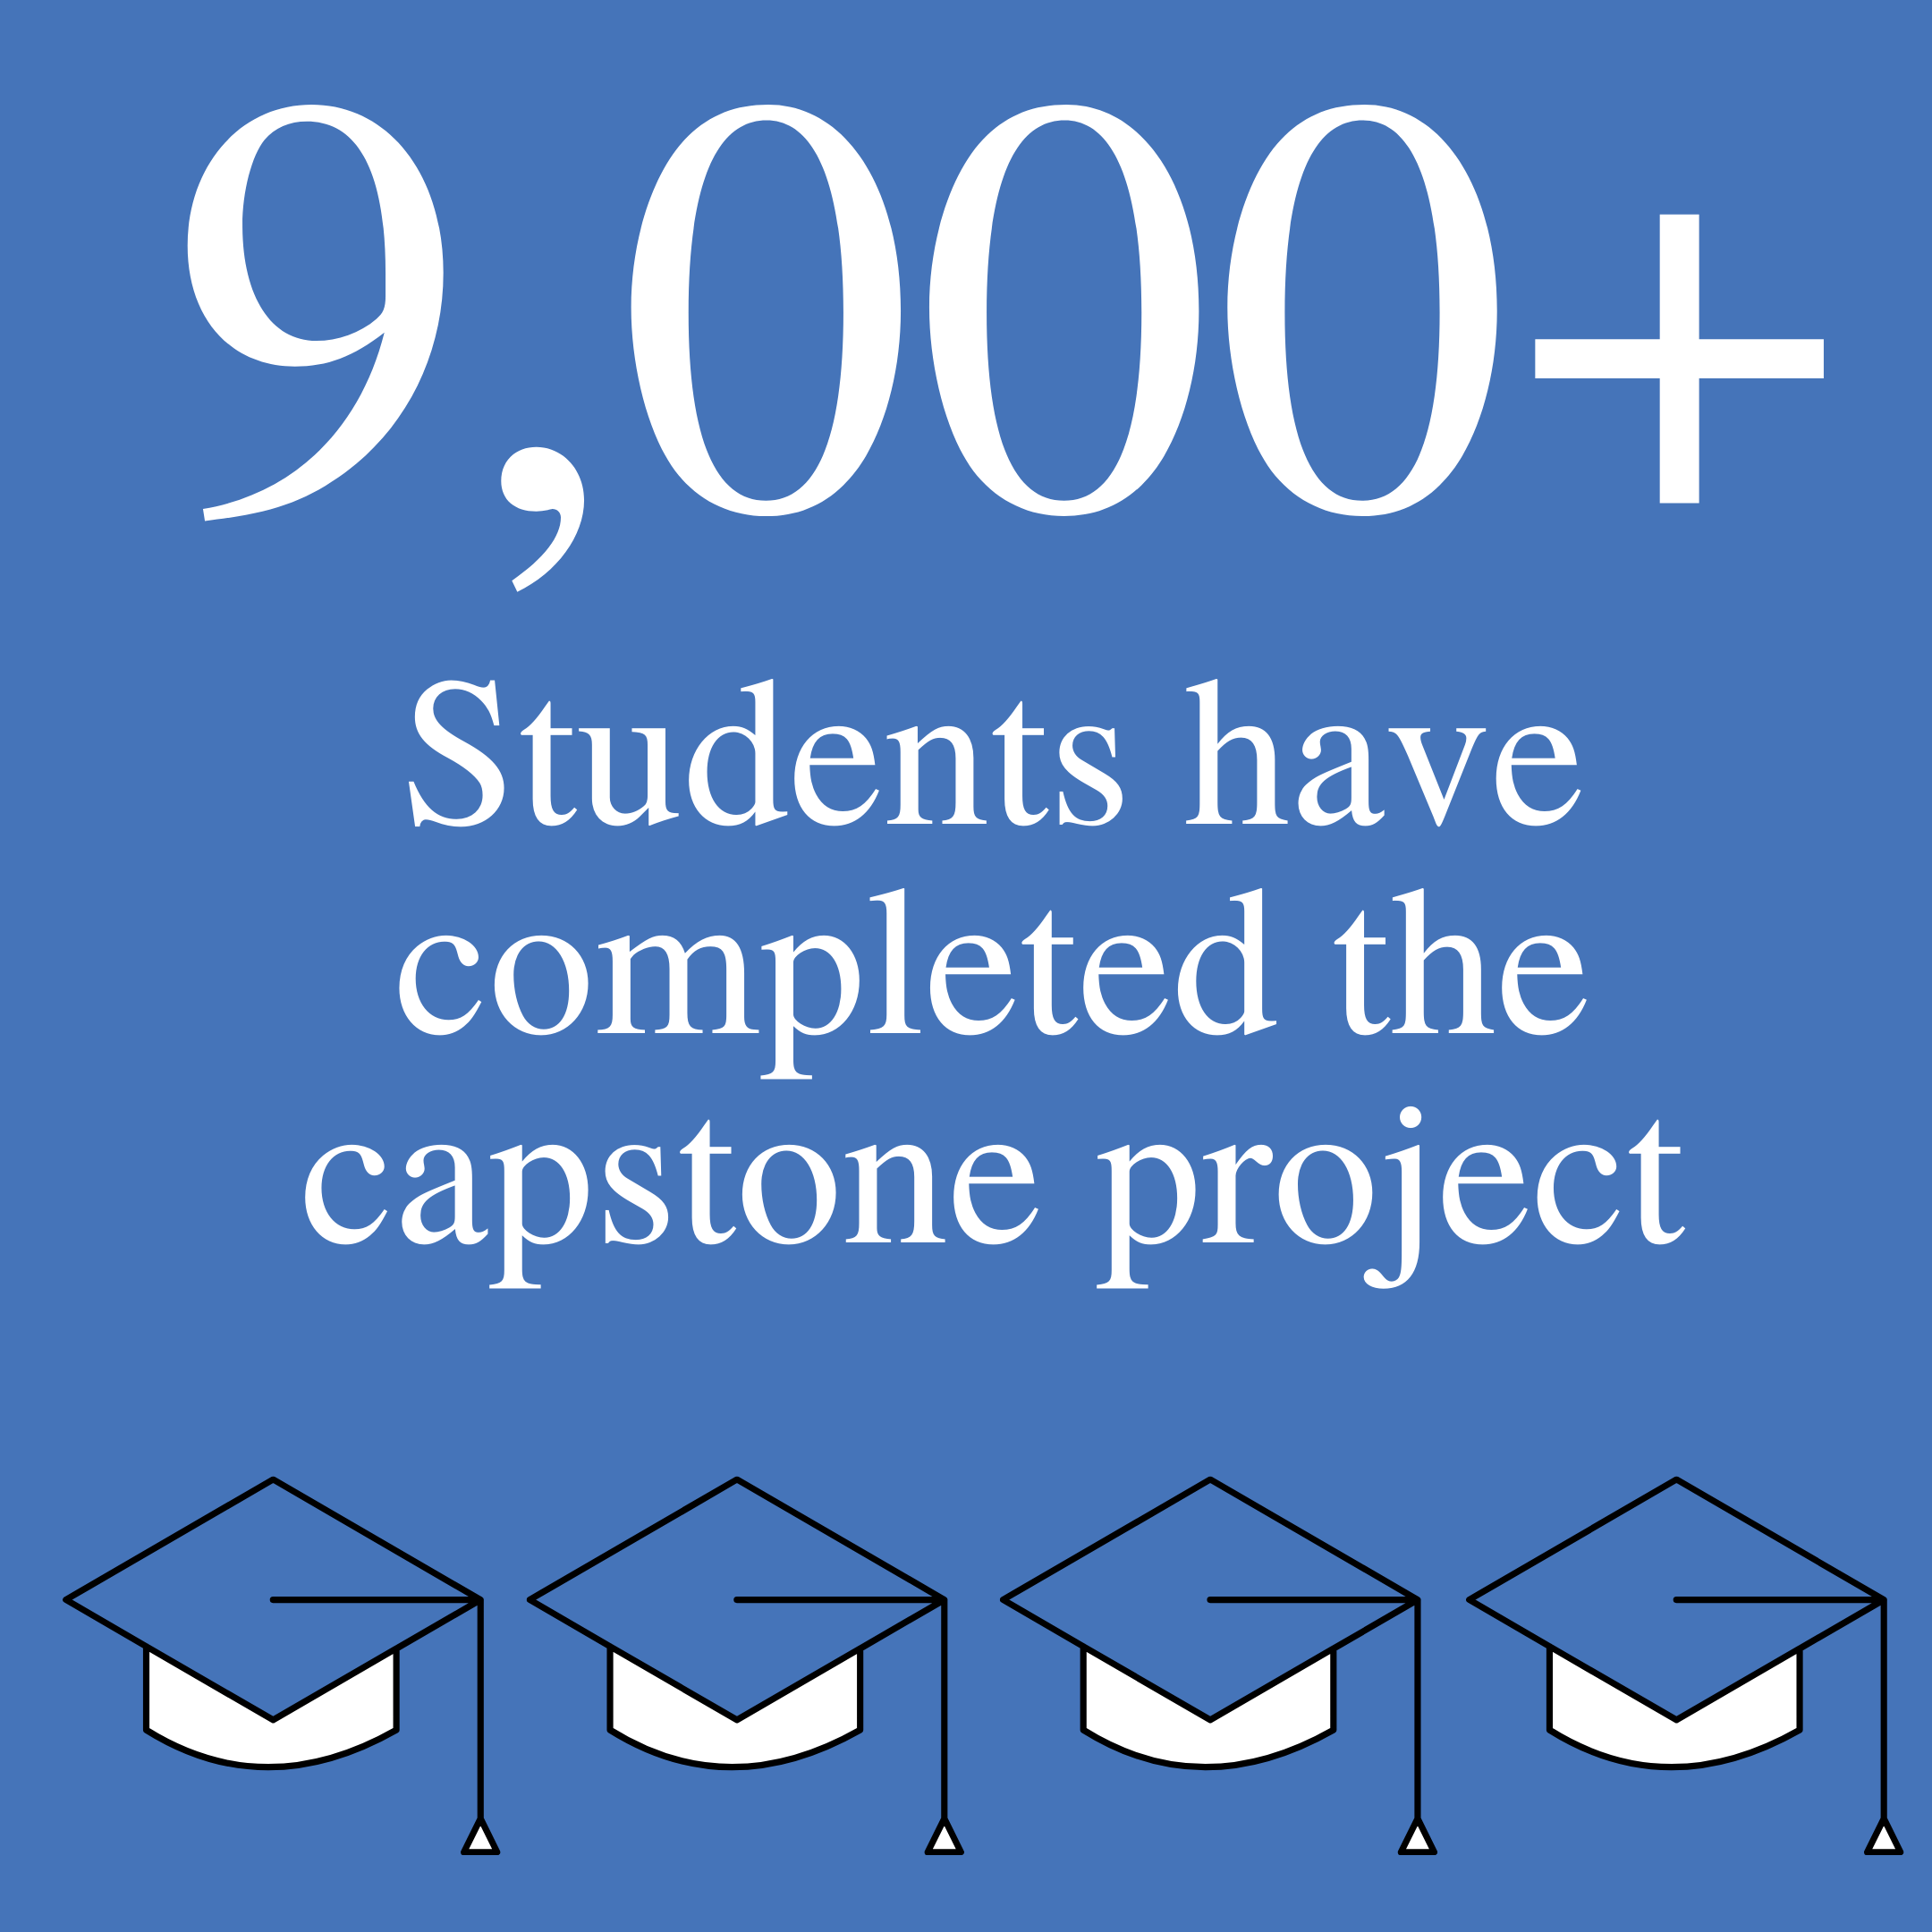 9000 students have completed the capstone project